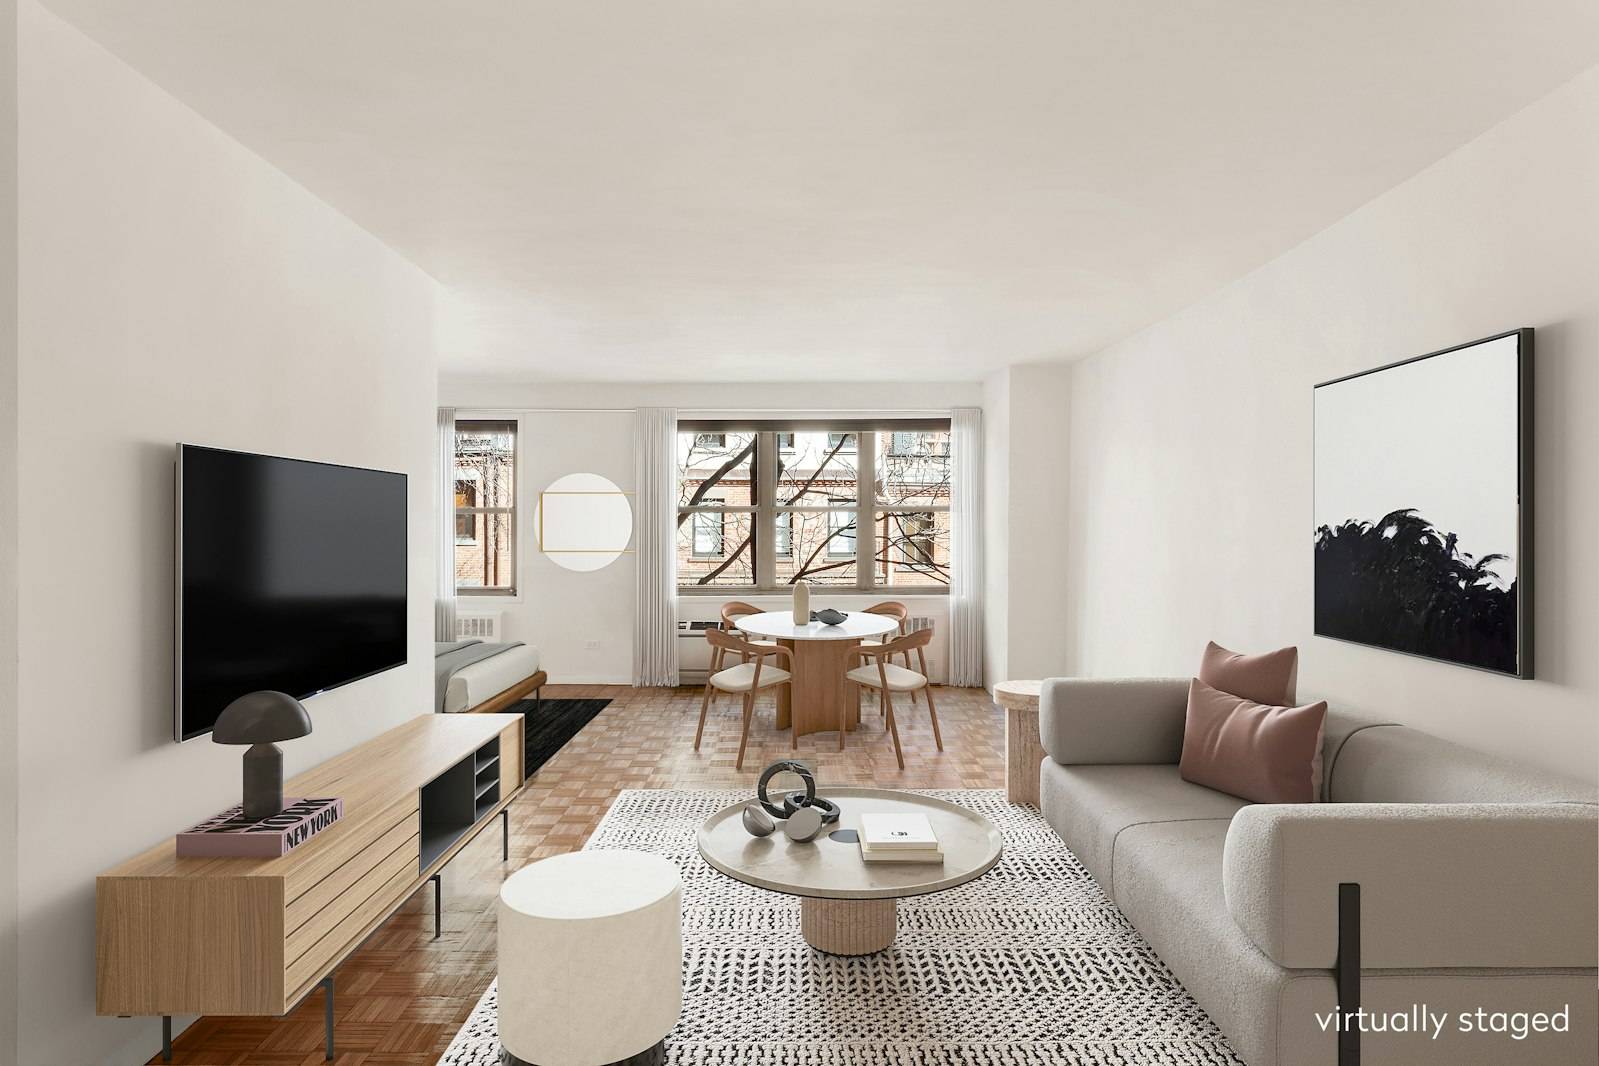 This spacious and sunny alcove studio apartment is situated on Park Avenue in a full service co op in the heart of Carnegie Hill, a prime and convenient location.